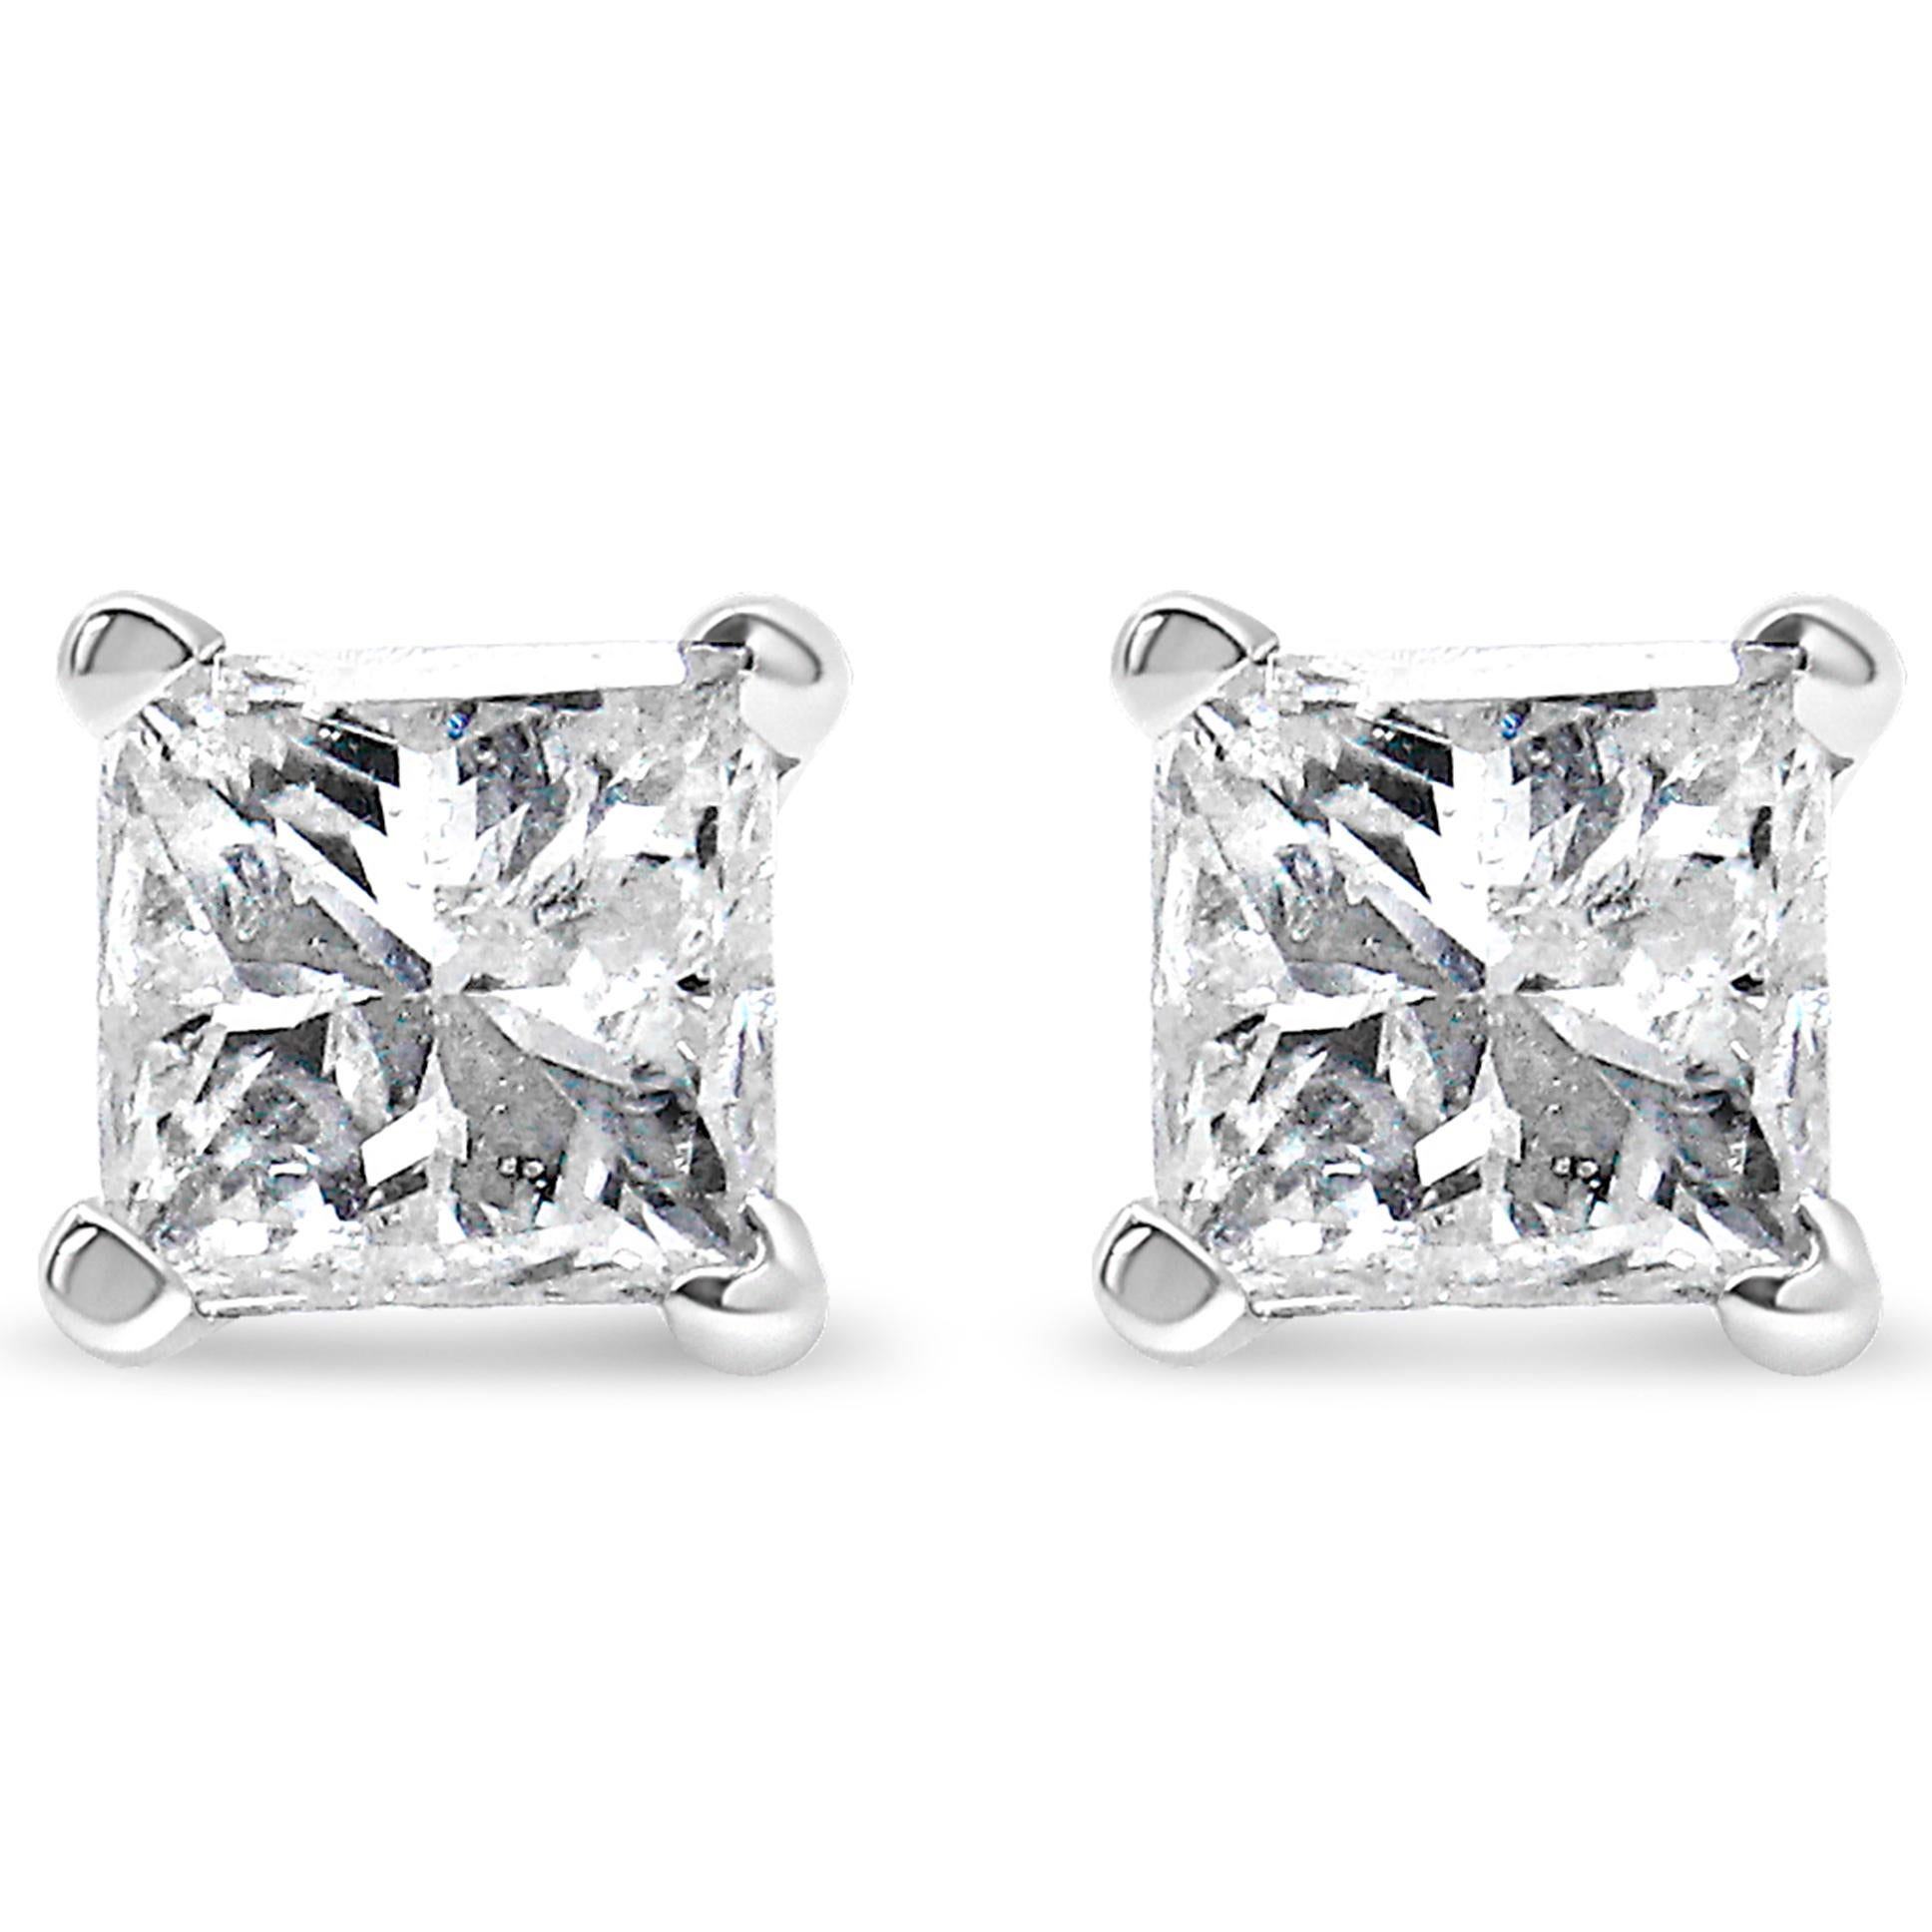 Celebrate any occasion with these classic shimmering diamond stud earrings. Crafted from 14k White Gold each earring showcases a sparkling Princess-Cut Solitaire Diamond in a 4-Prong Setting. Dazzling with 1 Cttw of diamonds and a bright polished